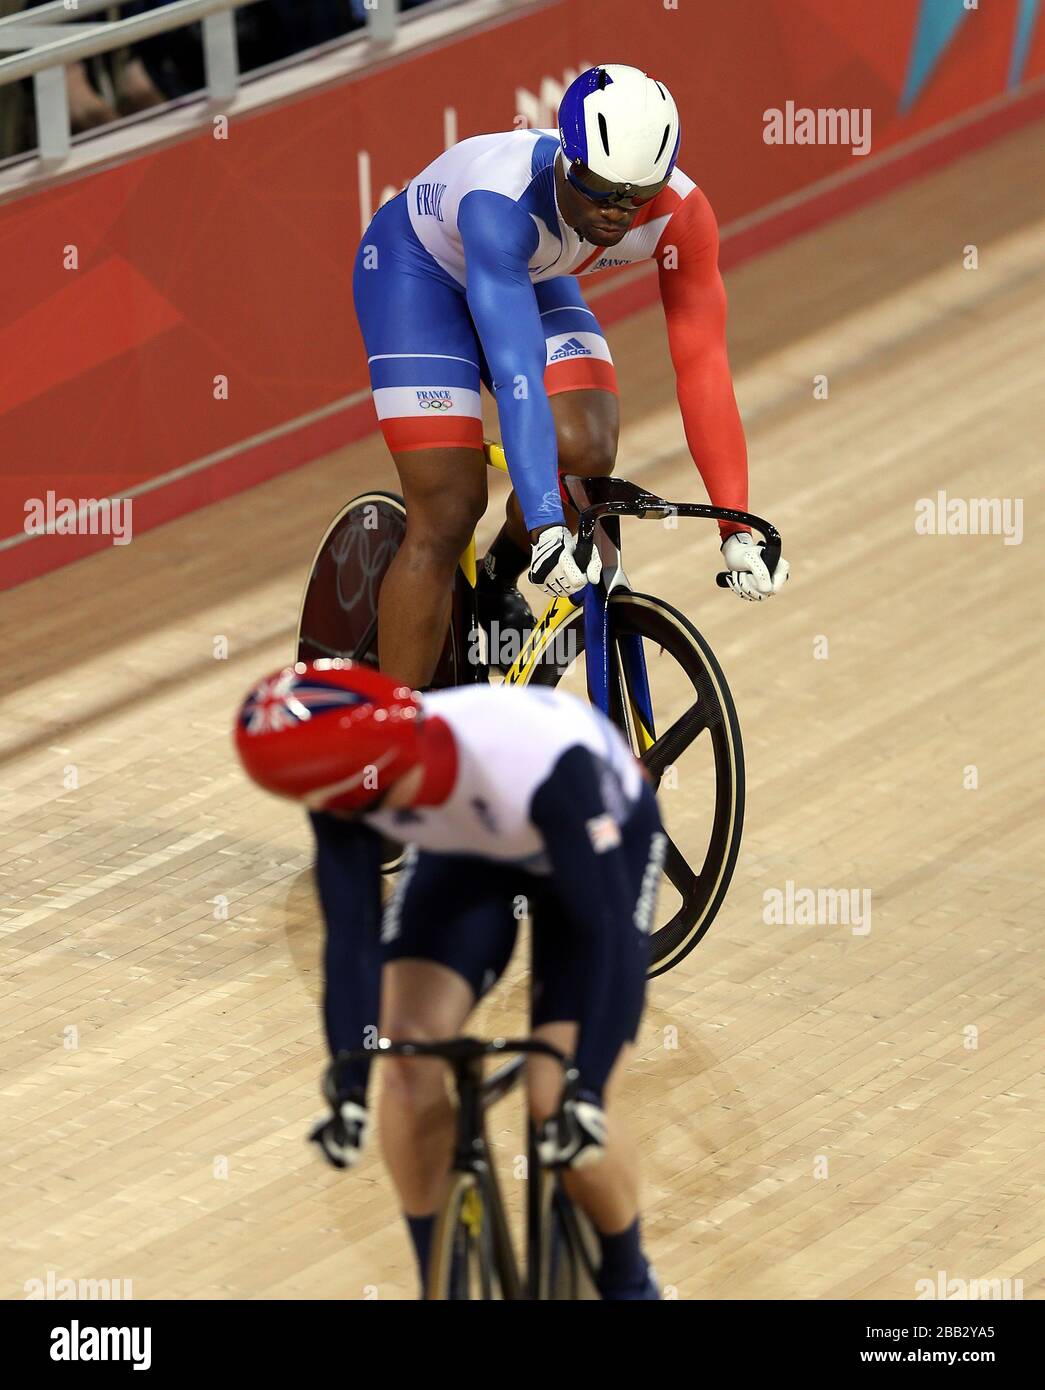 France's Gregory Bauge in the Men's Sprint final. Stock Photo